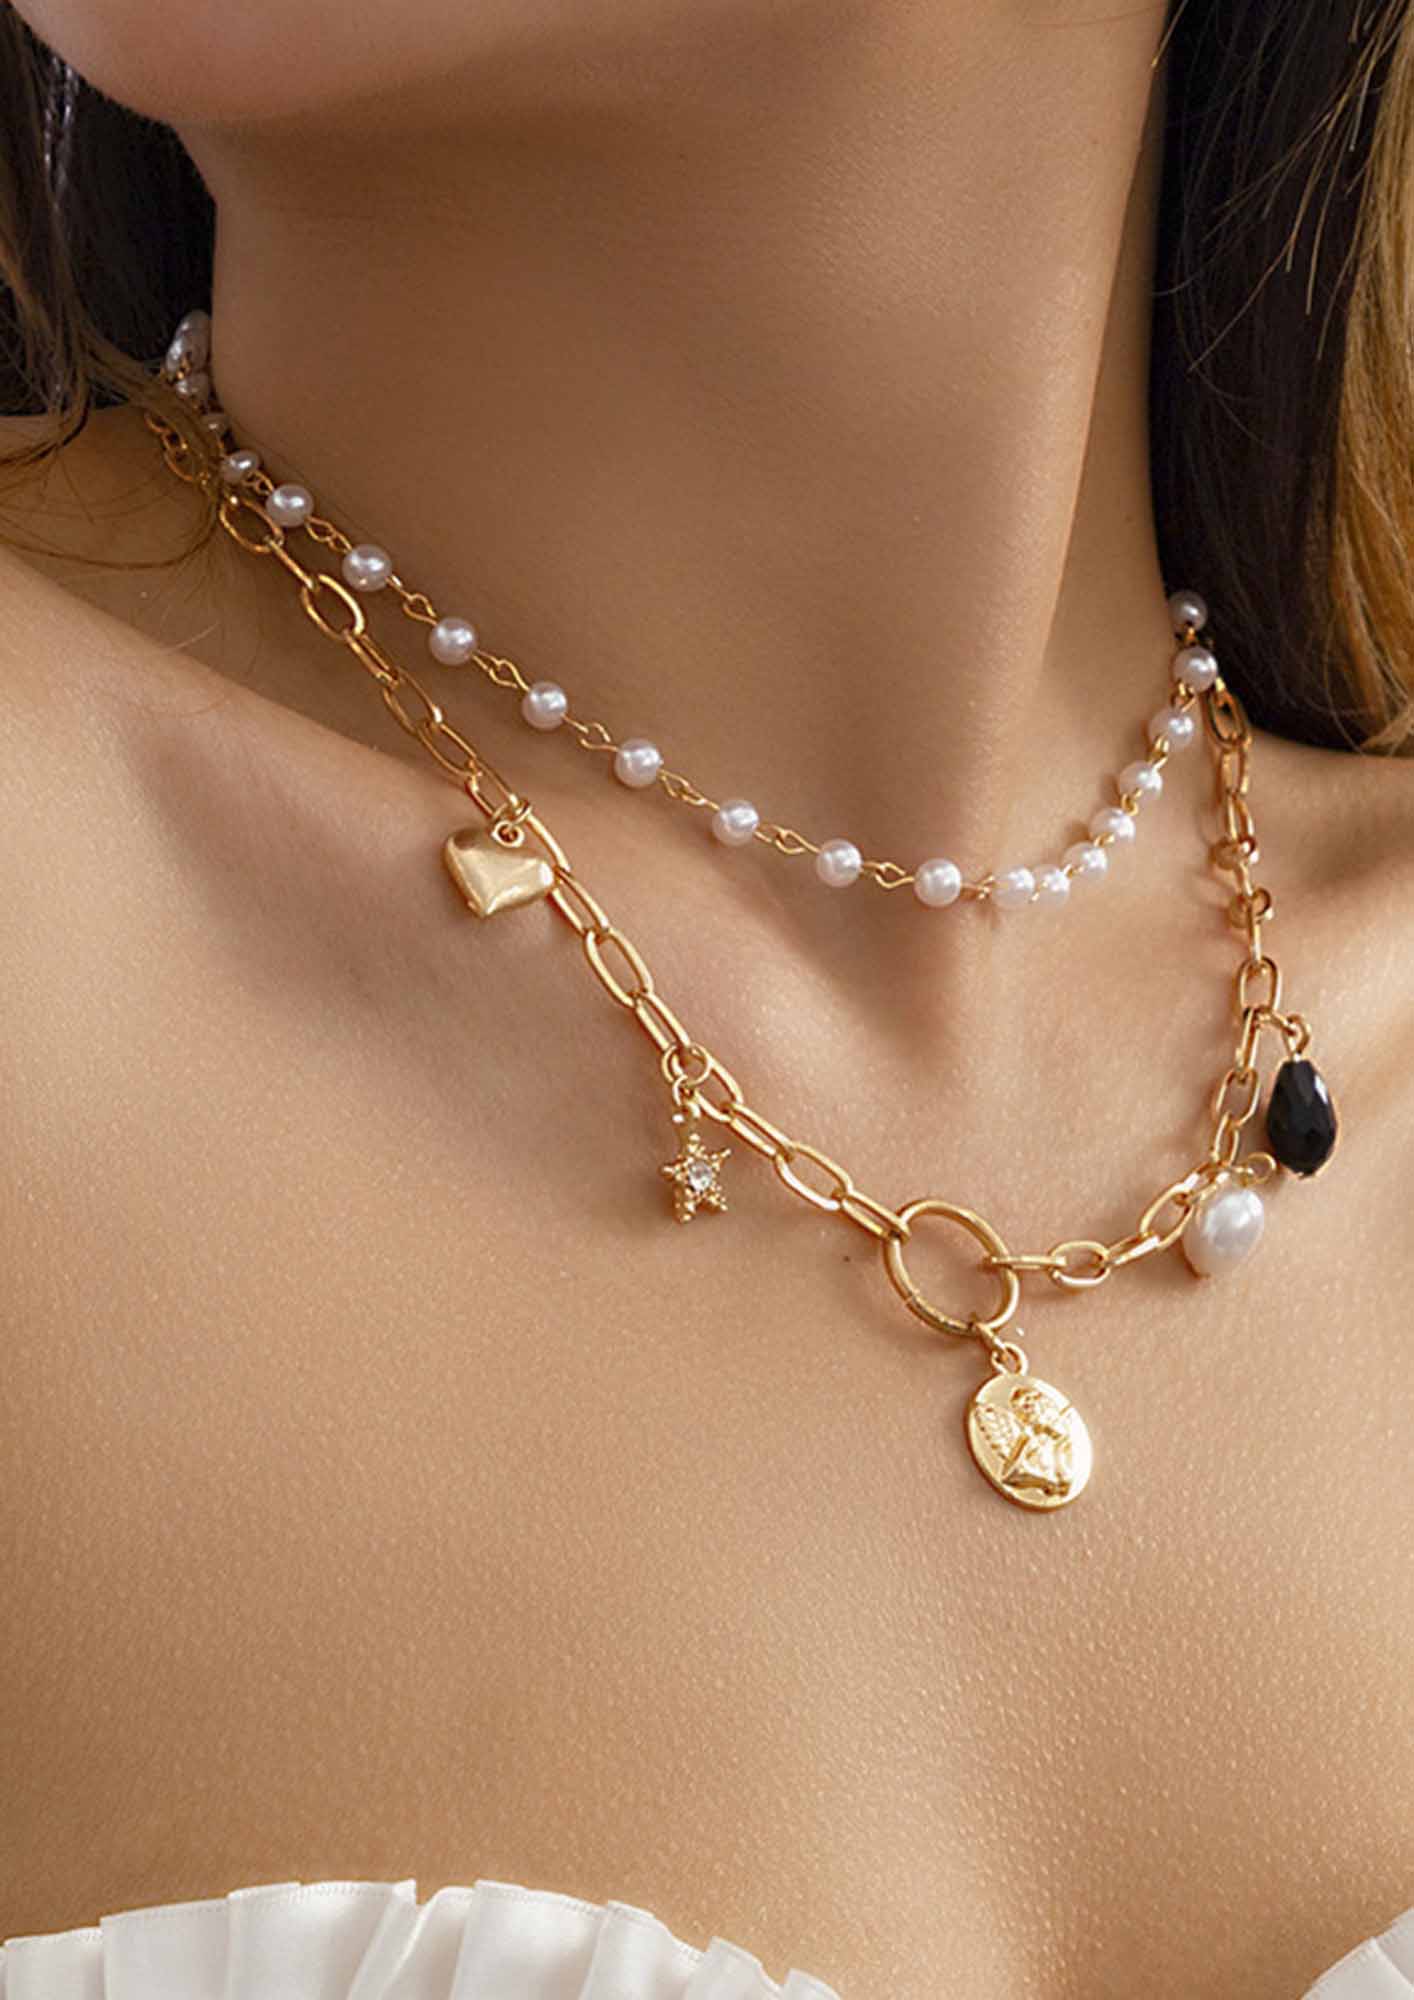 Buy Louis Vuitton Necklace Online In India -  India